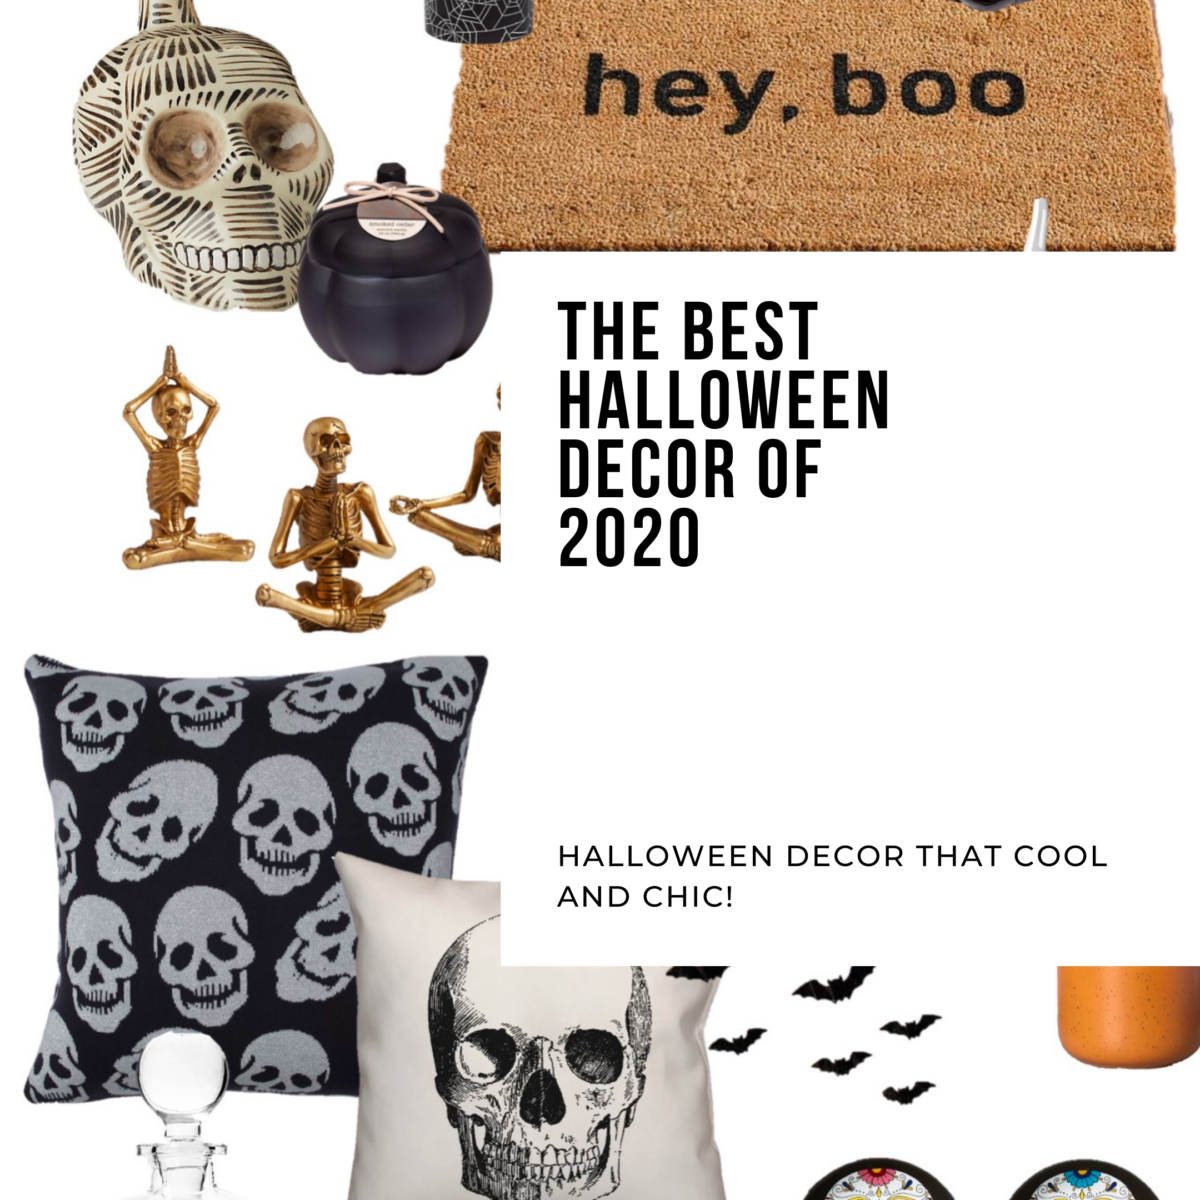 The Best Halloween Decor of 2020 - Dwell & Dine